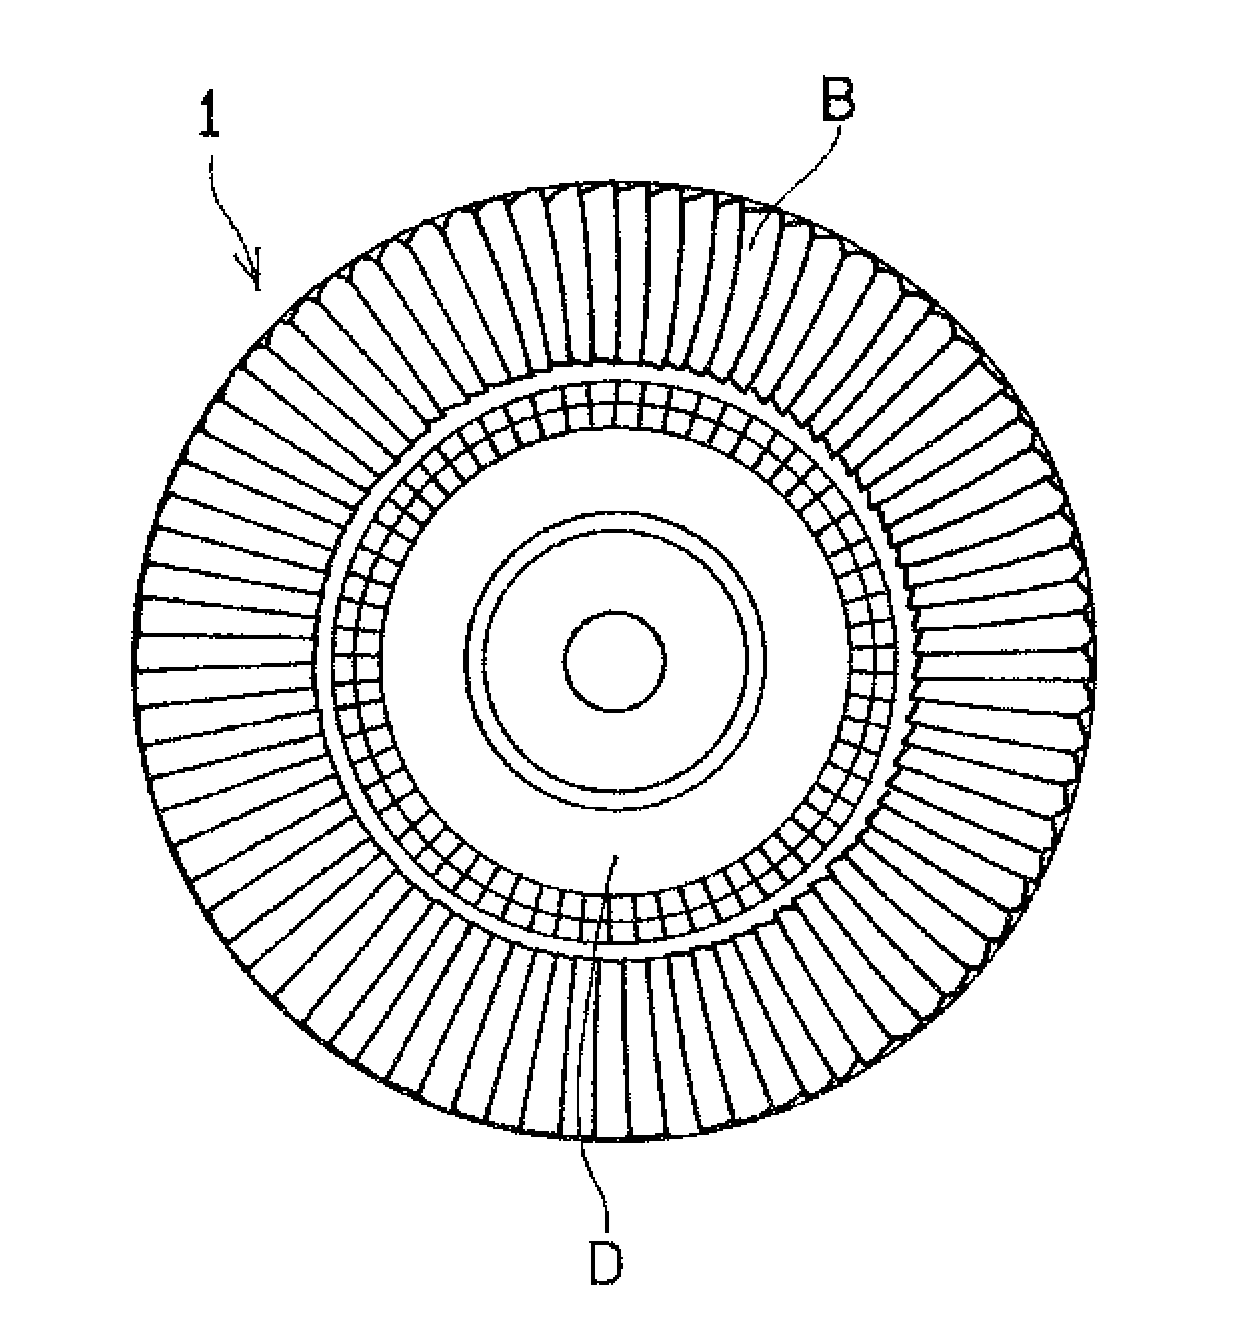 Rotating body provided with blades